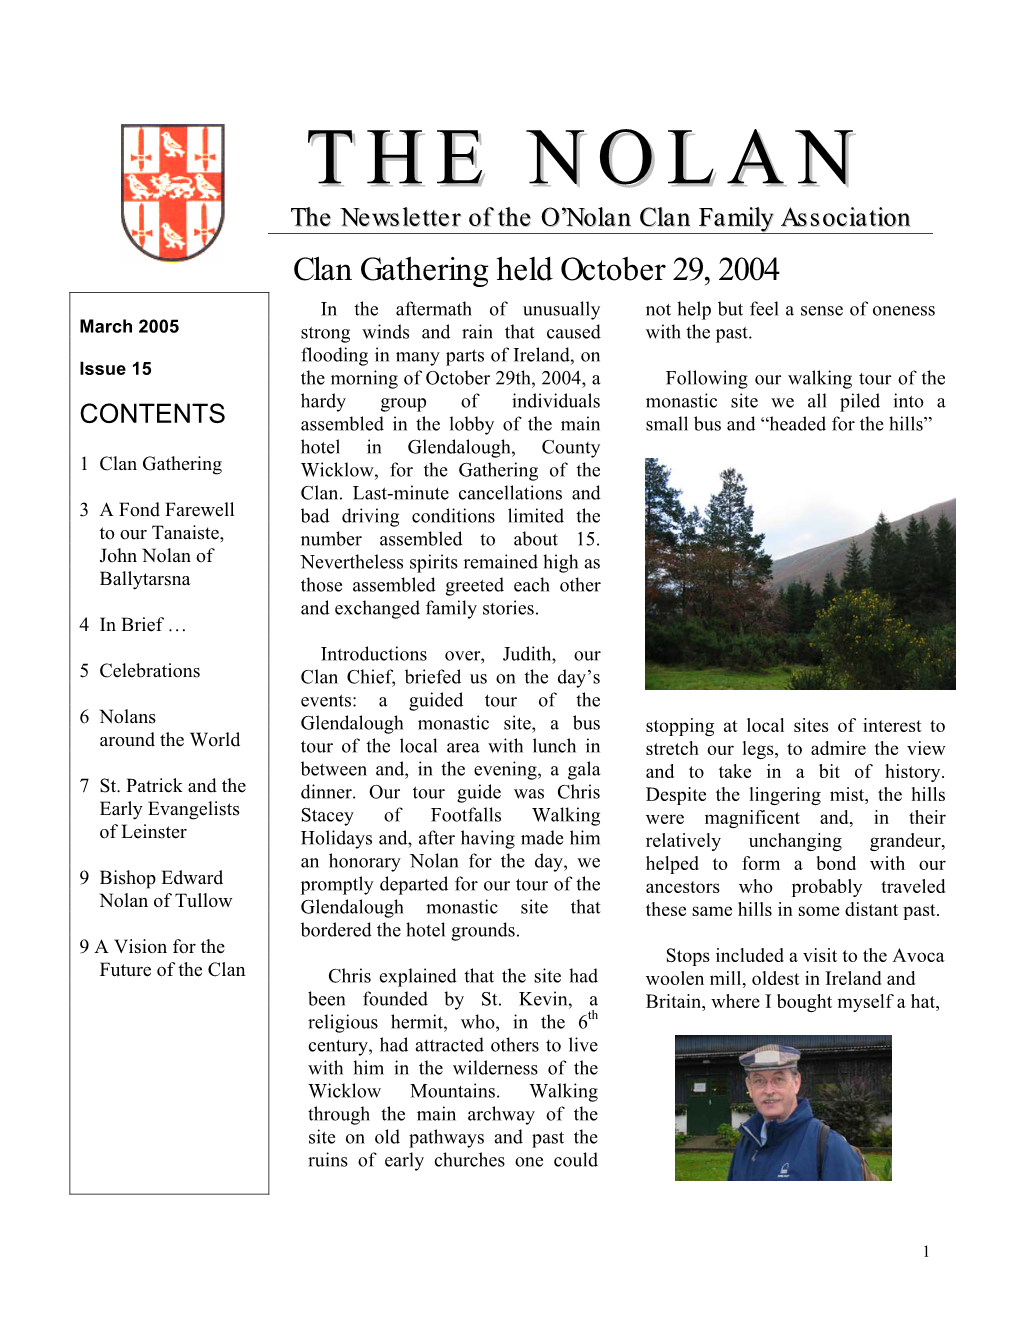 The Nolan Clan Newsletter Is Published at Least Once a Year by and for the Membership of the Nolan Clan Family Association